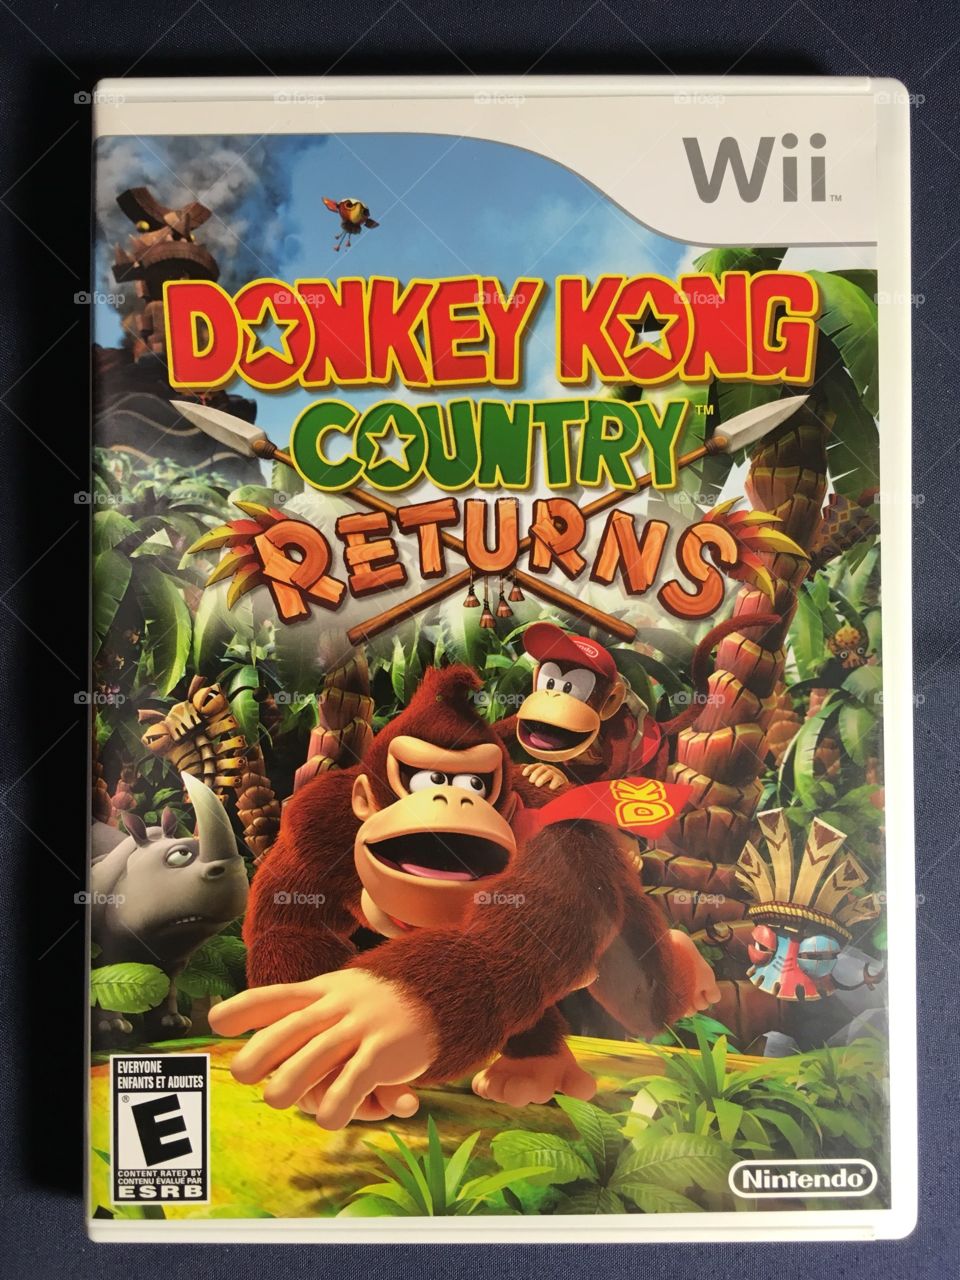 Donkey Kong Country Returns video game for the Nintendo Wii - released 2010